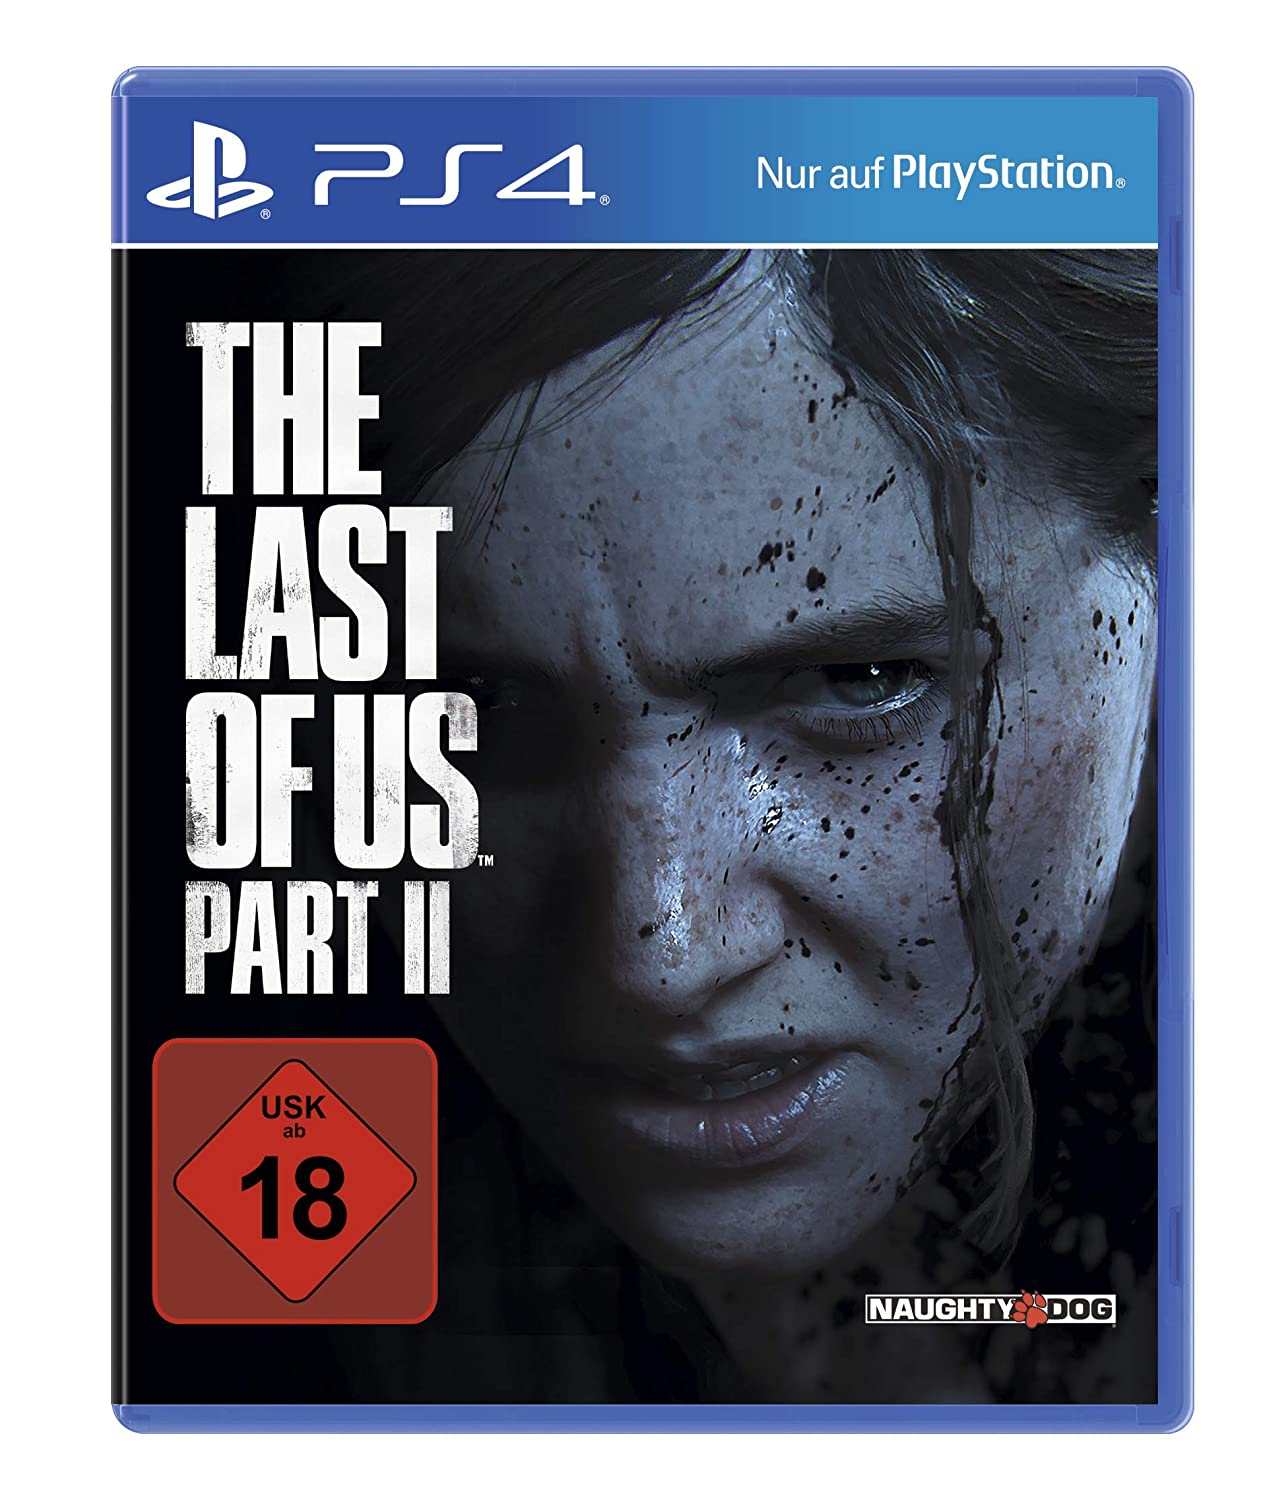 Anita Sarkeesian DESTROYED The Last Of Us 2 (Theory) 